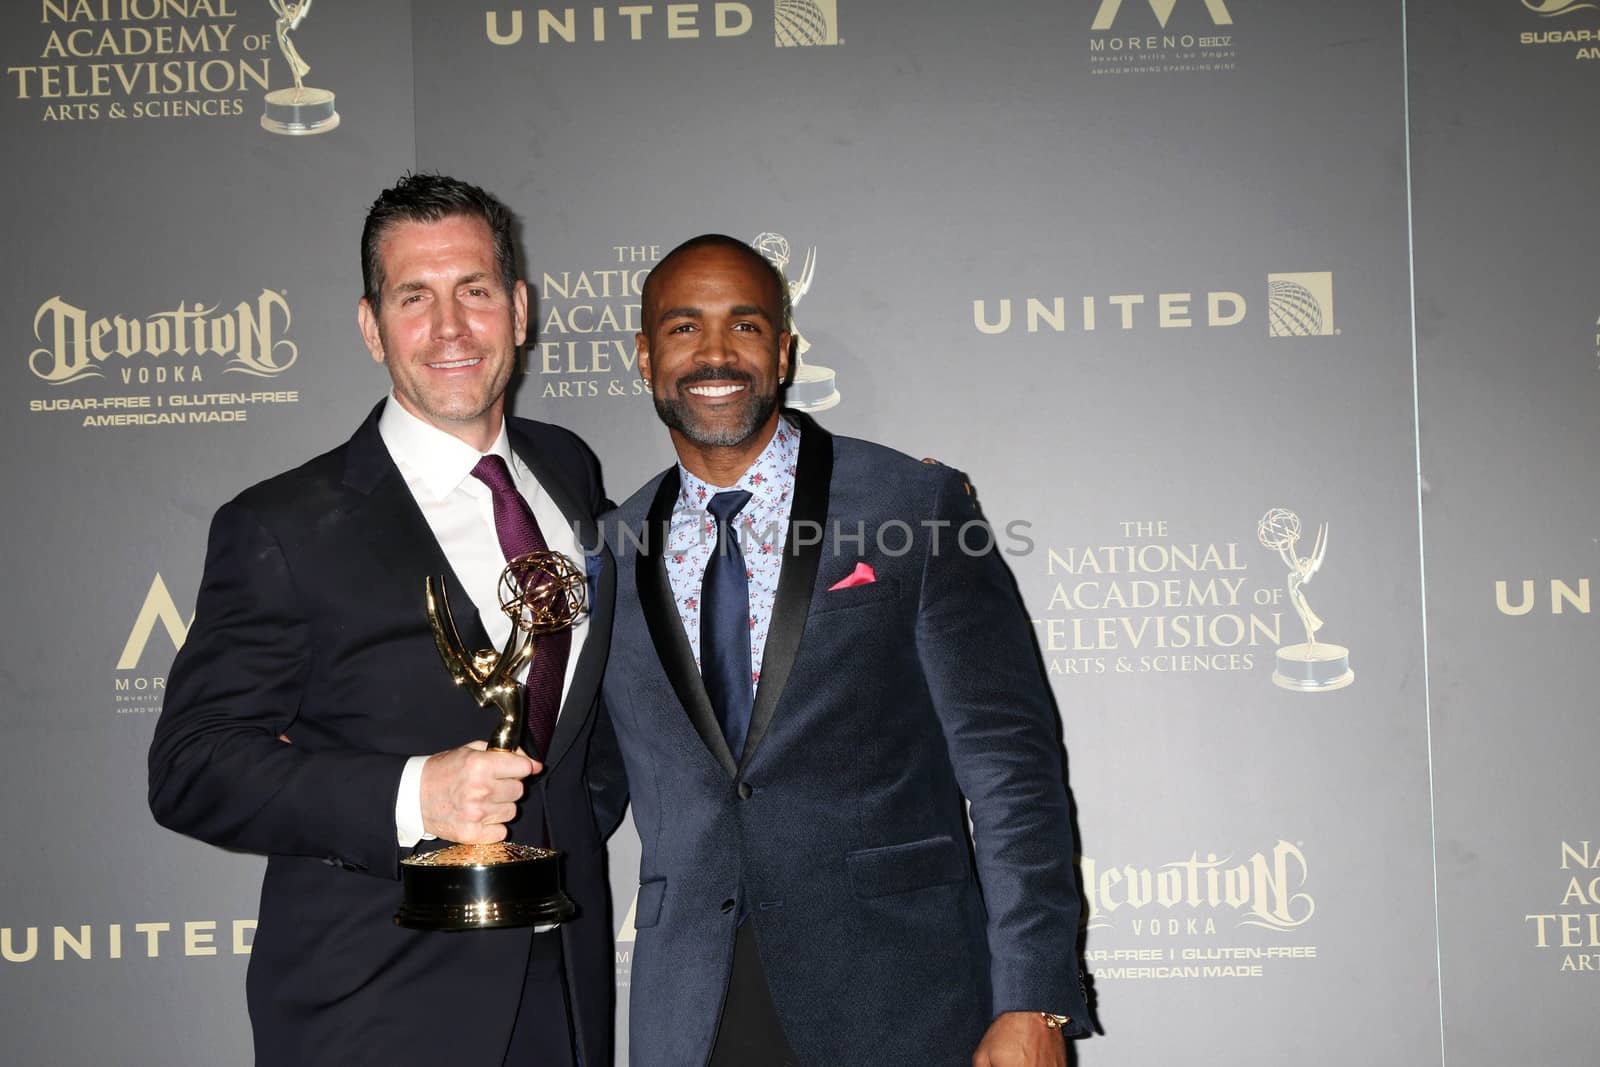 Frank Valentini, Donnell Turner, Outstanding Drama Series, General Hospital
at the 44th Daytime Emmy Awards - Press Room, Pasadena Civic Auditorium, Pasadena, CA 04-30-17/ImageCollect by ImageCollect